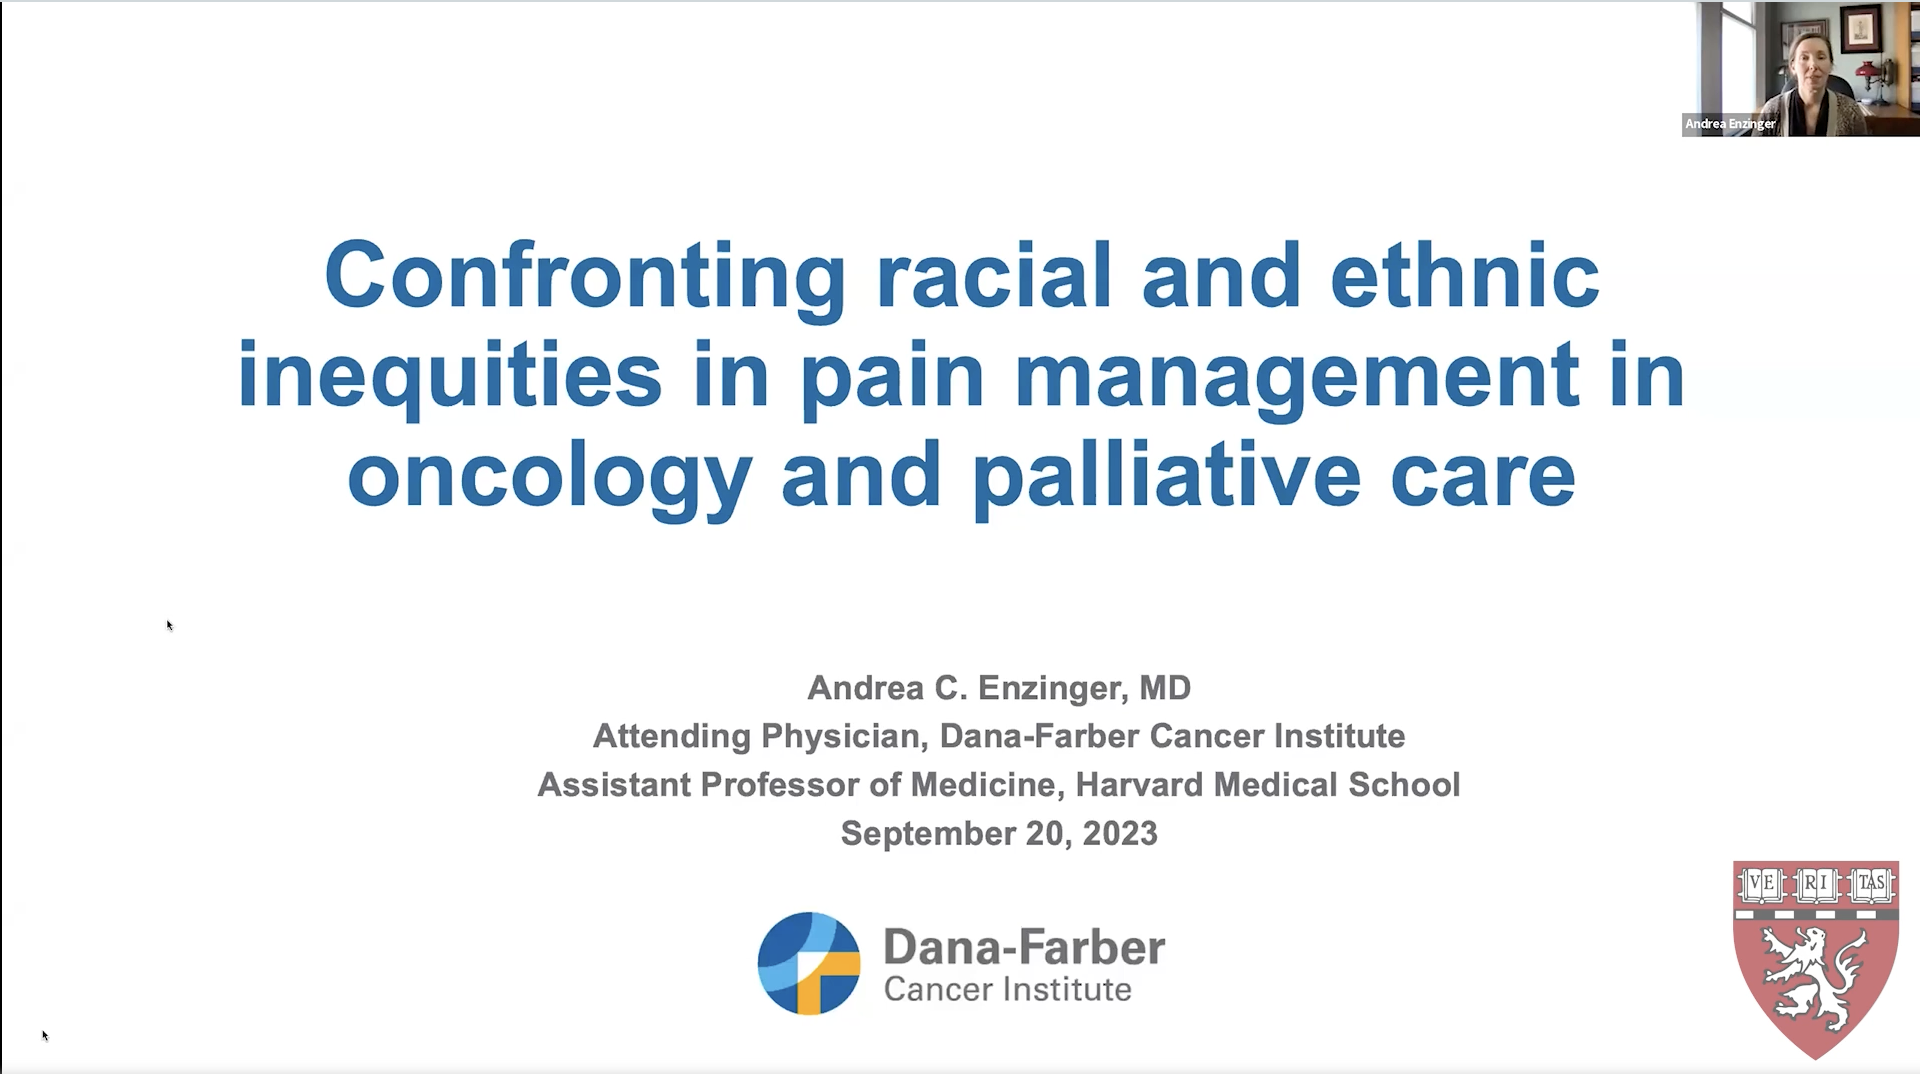 Confronting racial and ethnic inequities in pain management in oncology and palliative care